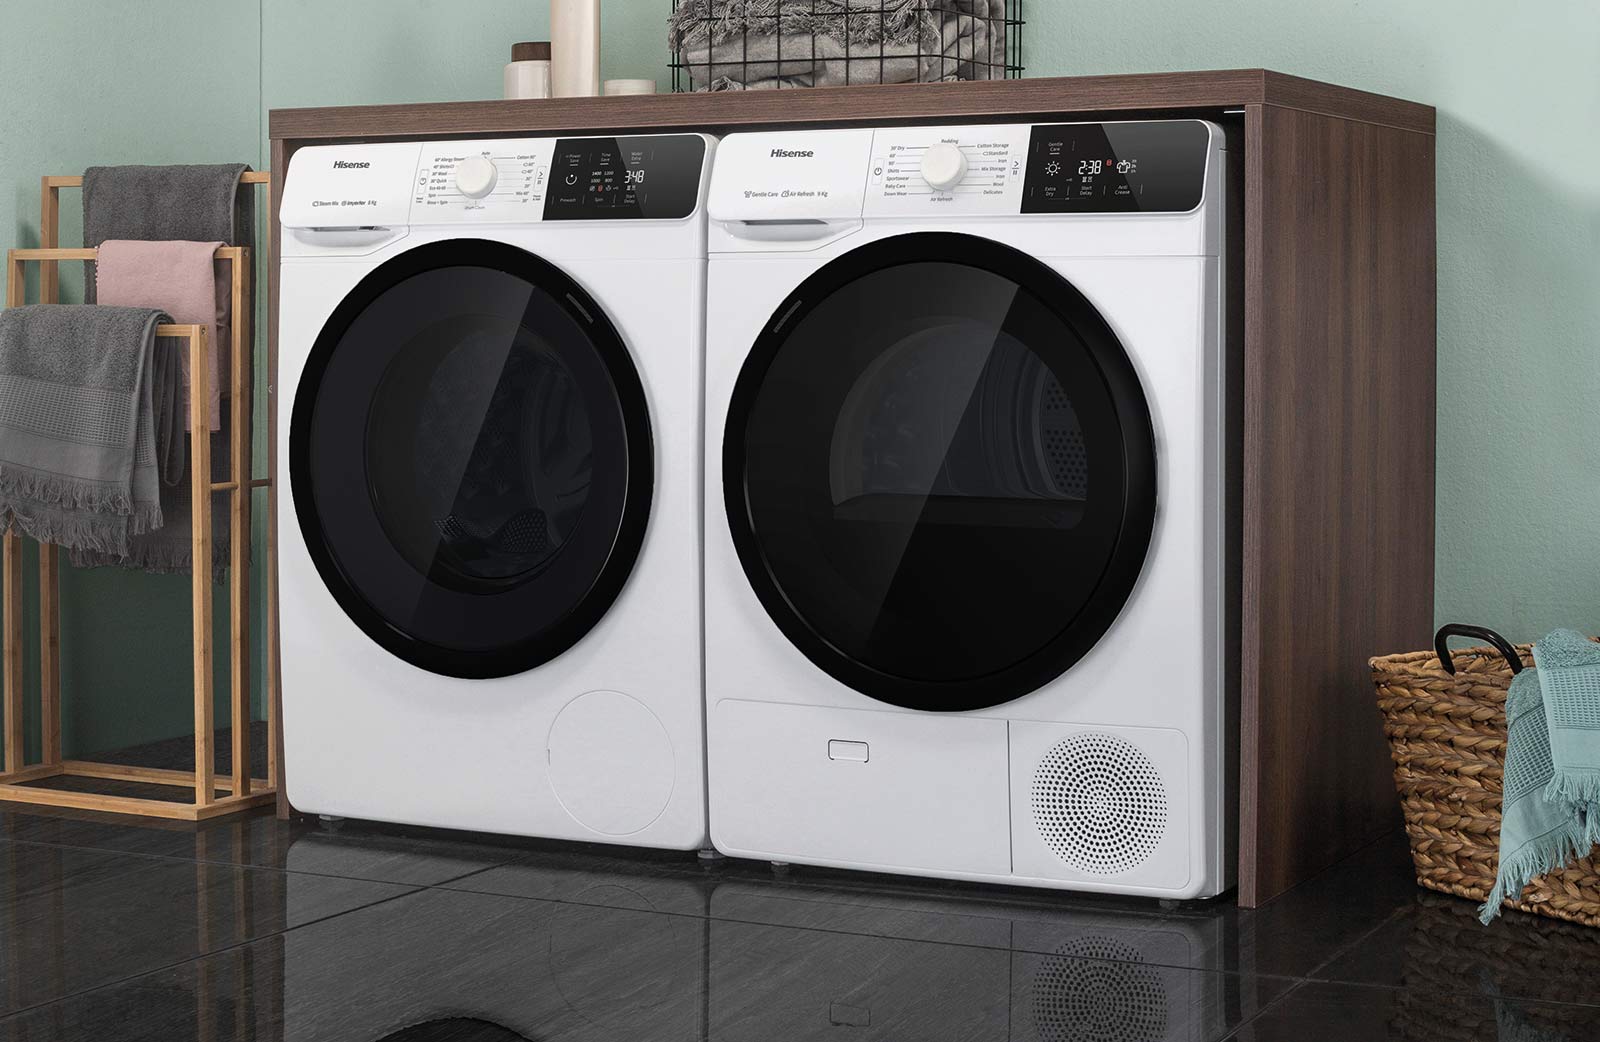 Hisense rolls out new laundry machines, though no smarts – Pickr